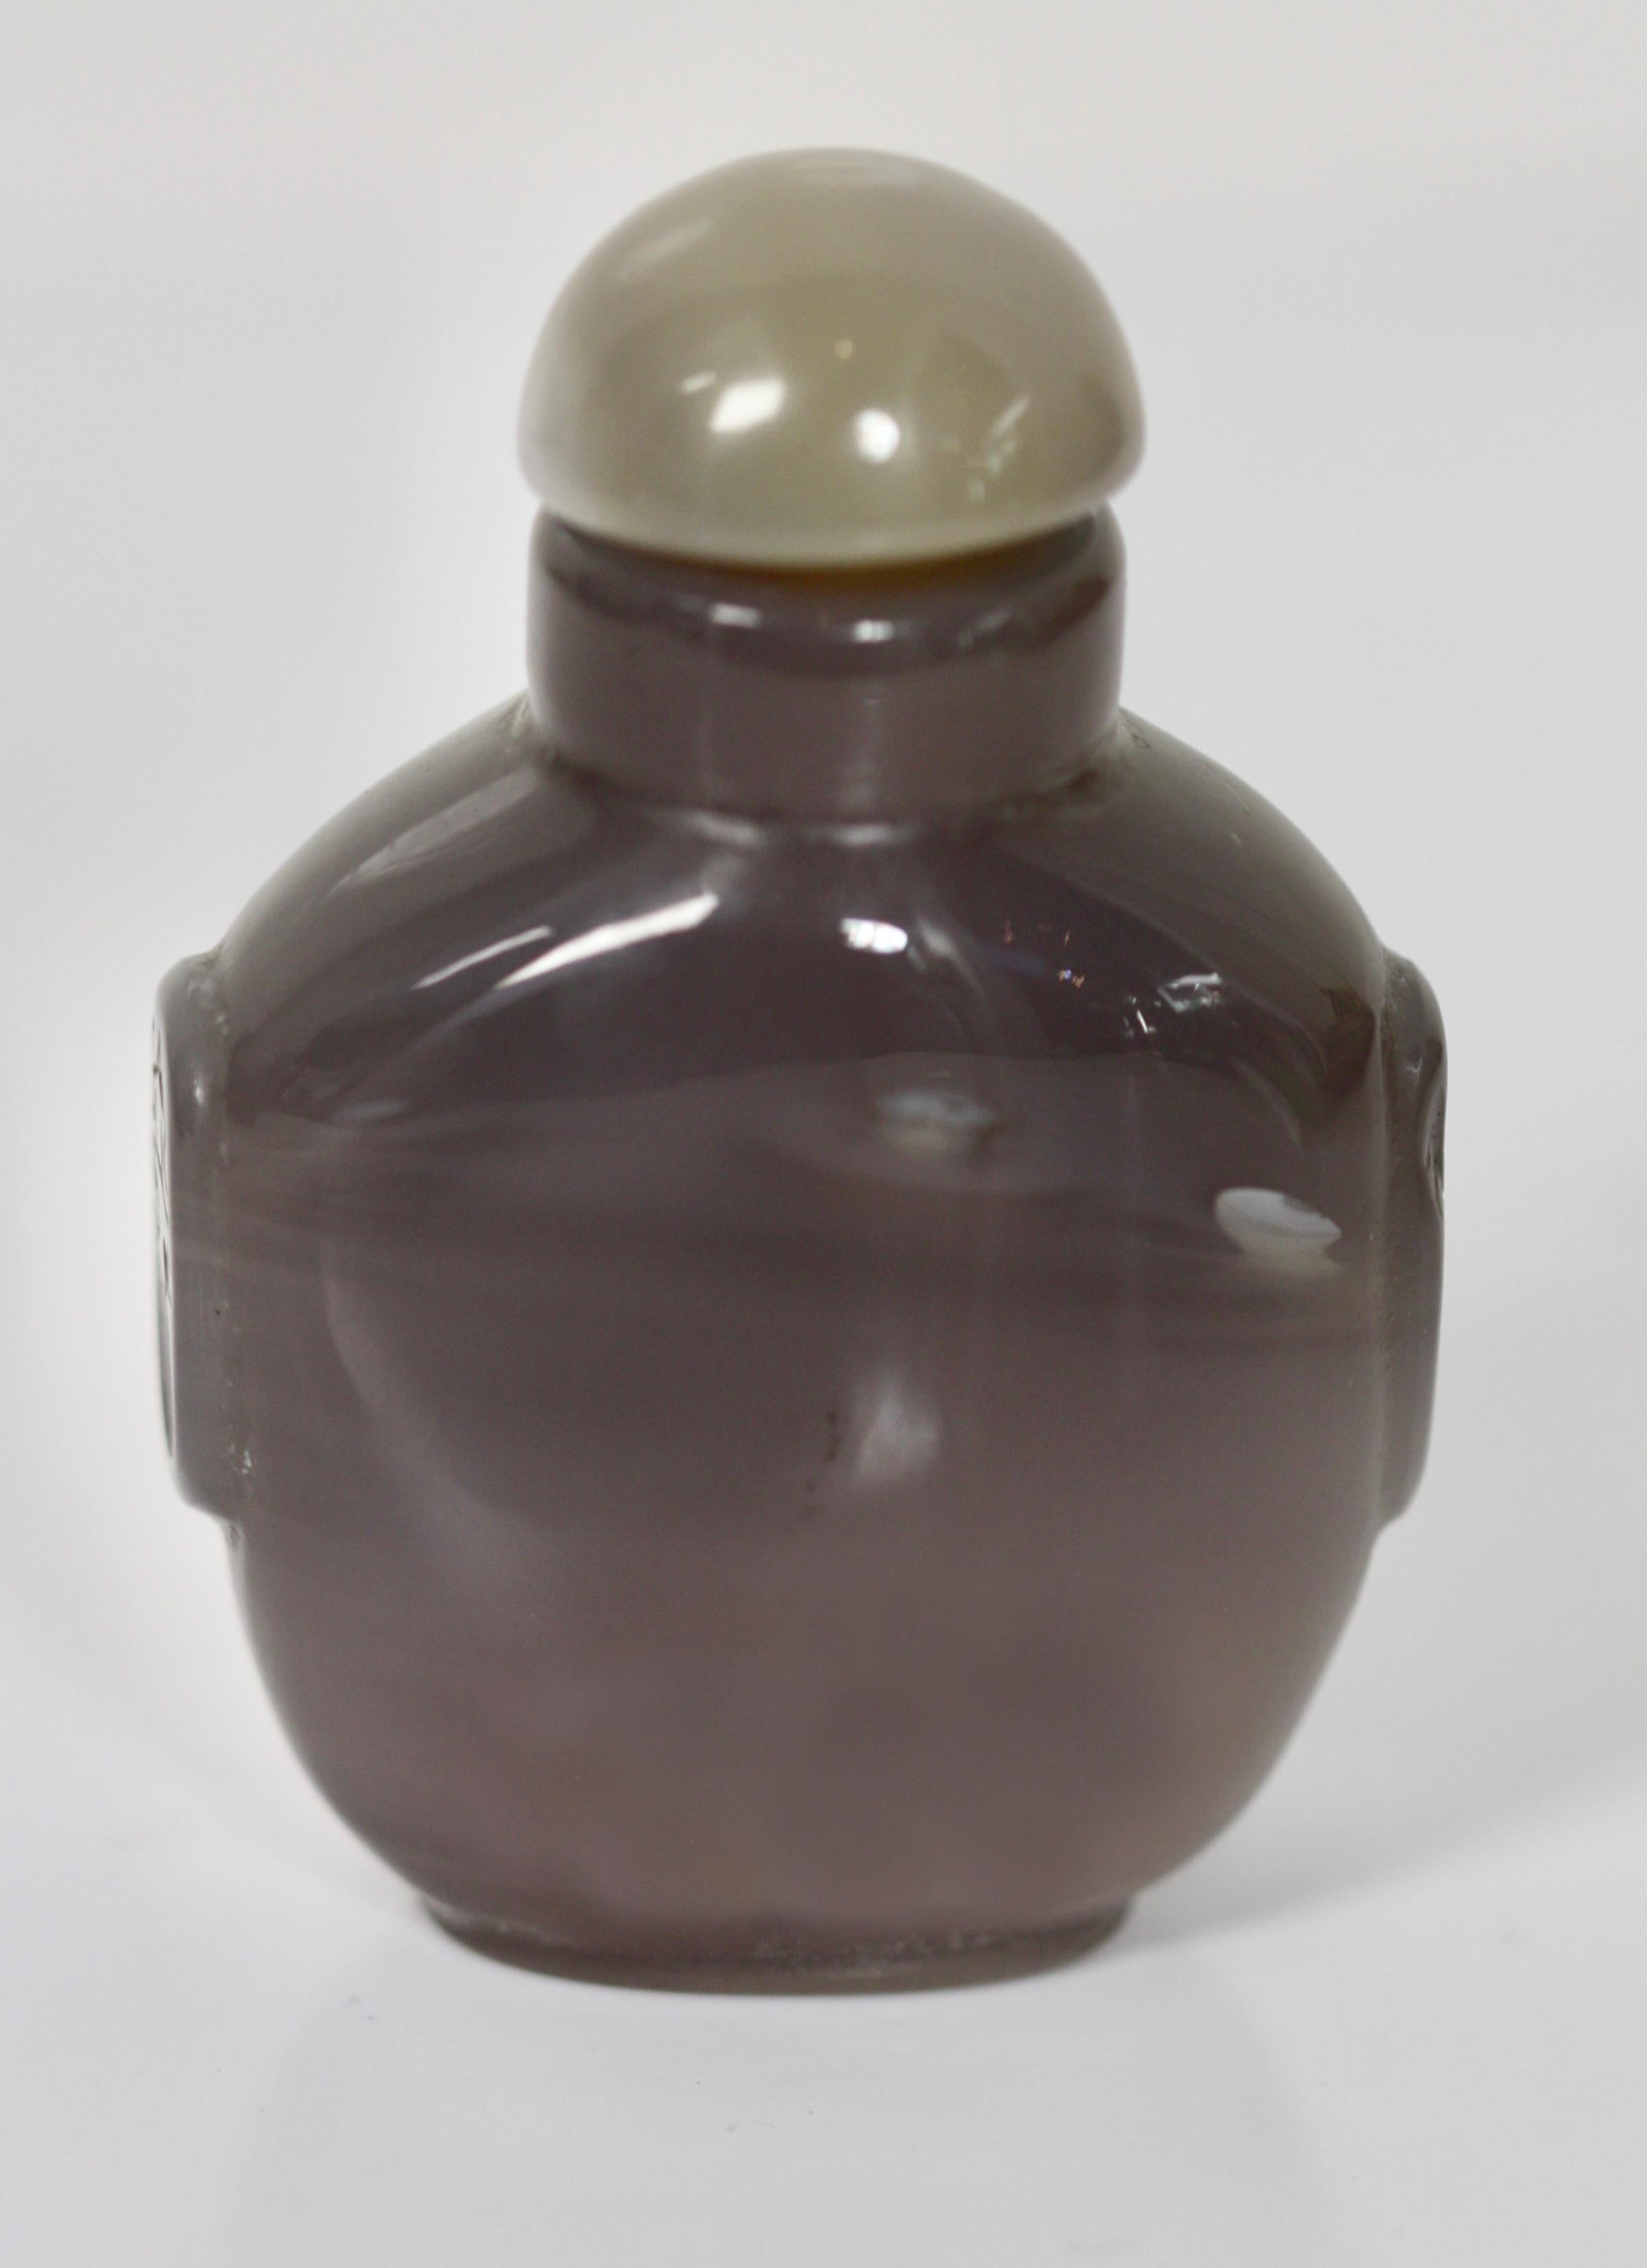 A Shadow Agate 'Horse' Snuff Bottle
Chinese, Qing Dynasty 19th Century, has stopper
6.35 cm, 2 1/2 in.